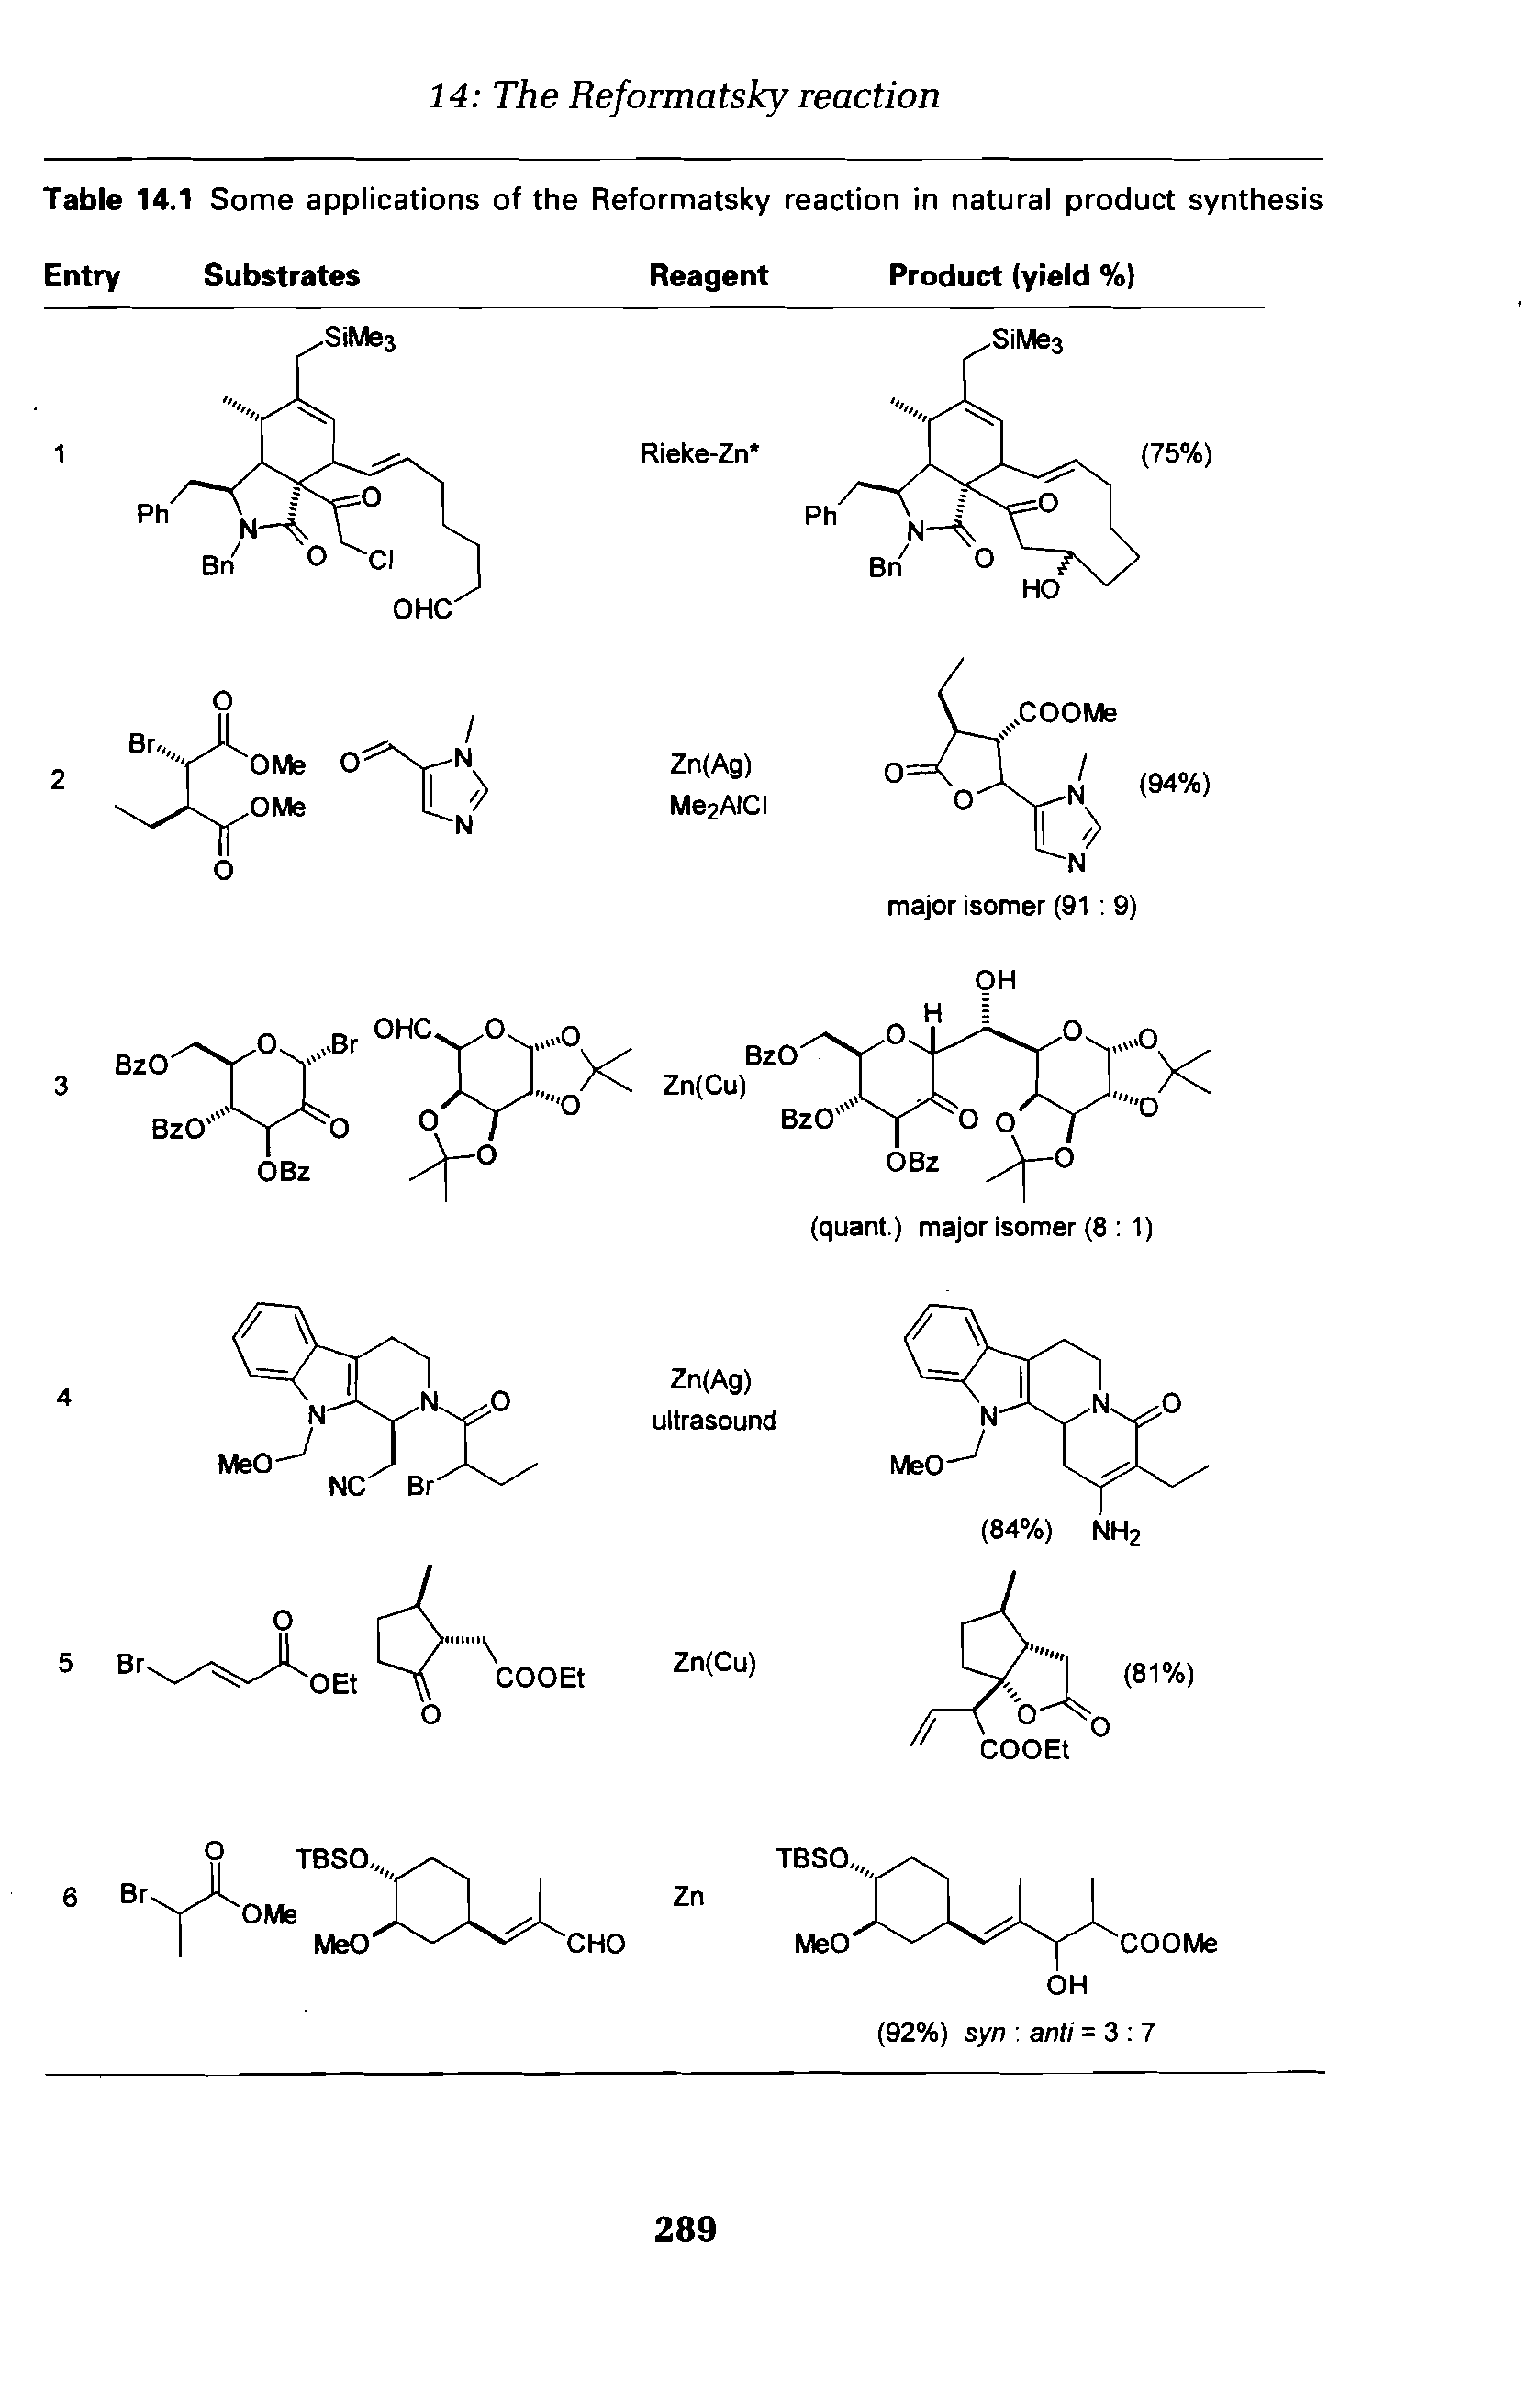 Table 14.1 Some applications of the Reformatsky reaction in natural product synthesis...